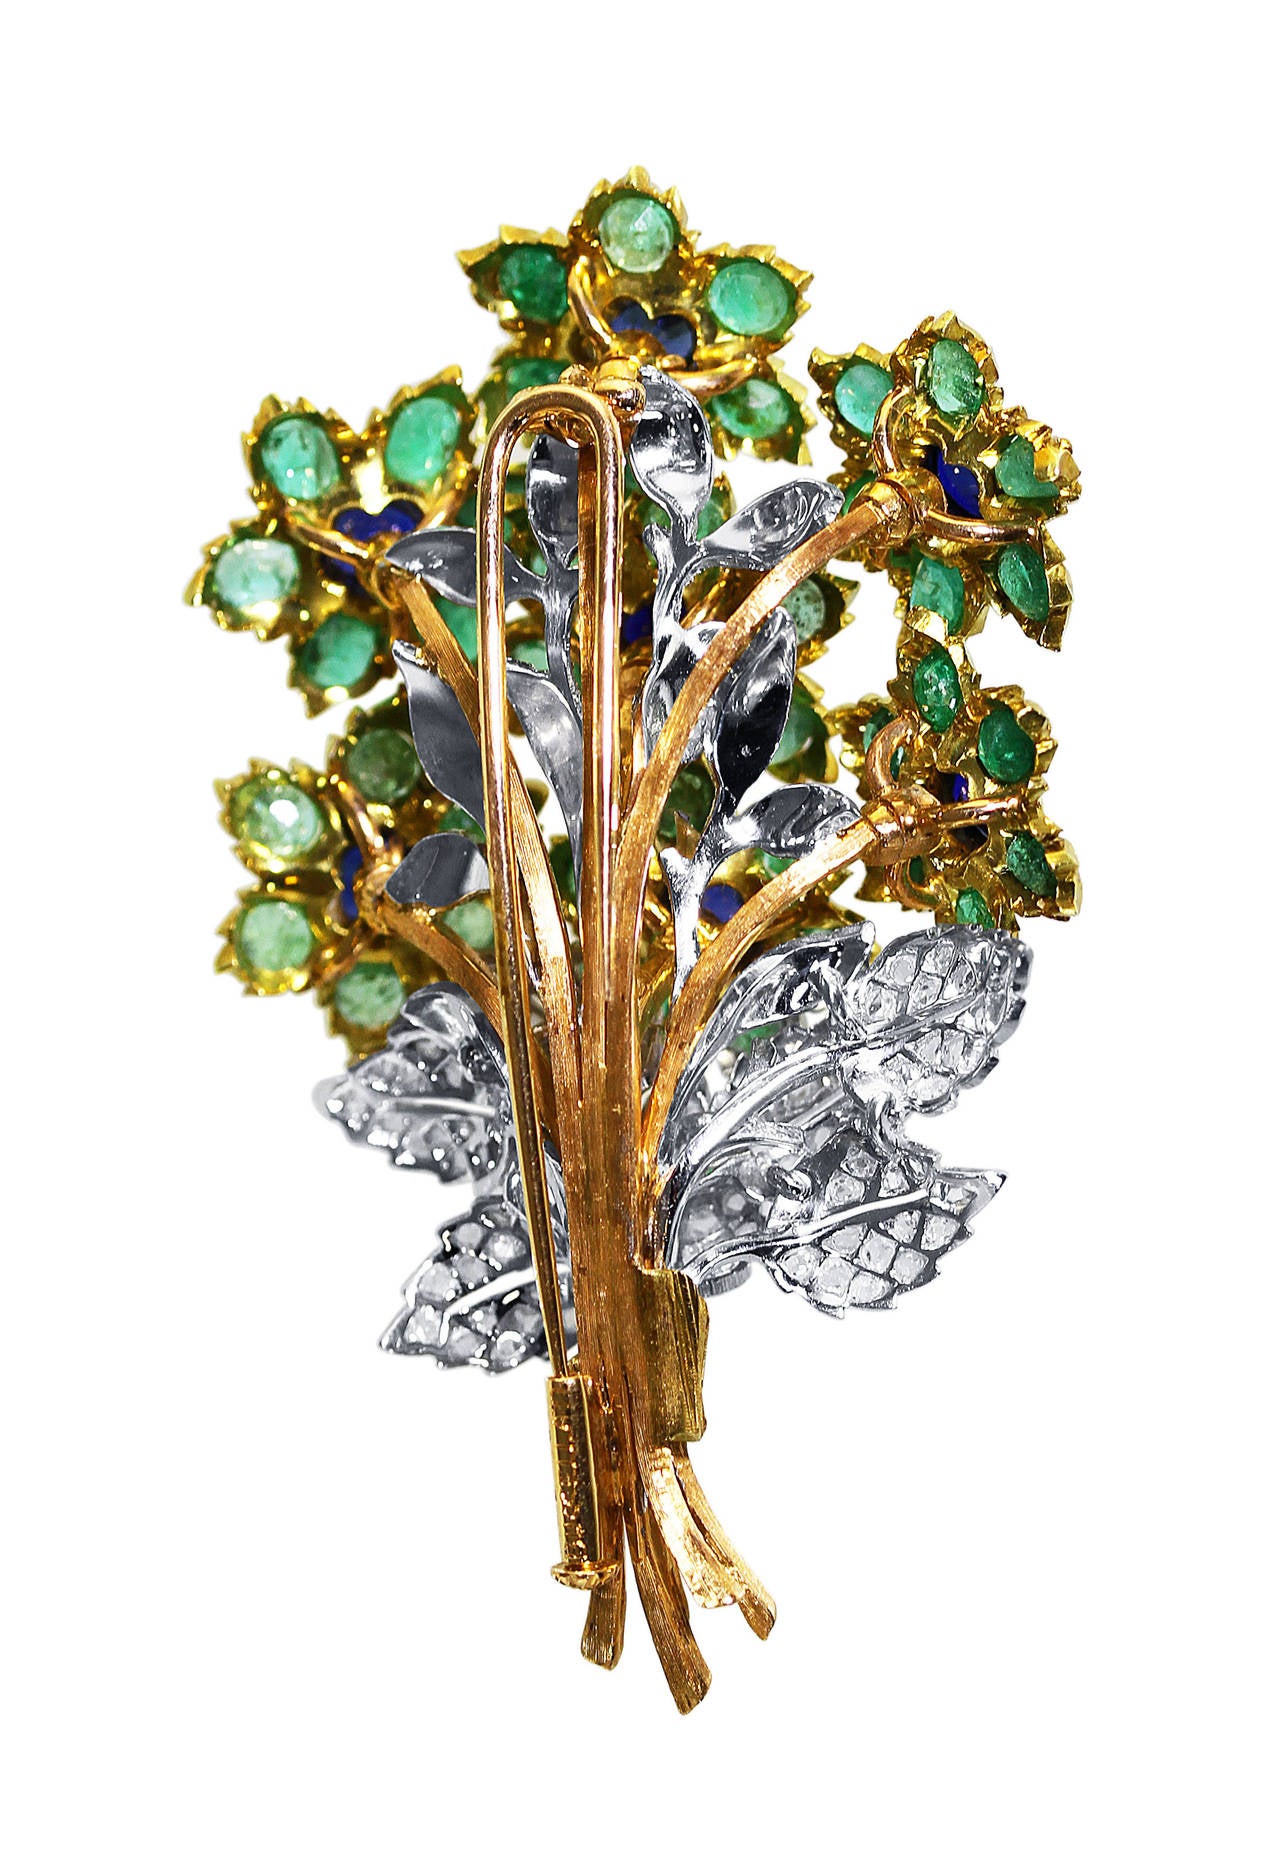 An 18 karat yellow and white gold, emerald, sapphire and diamond flower brooch by Buccellati, Italy, designed as a stylized bouquet of flowers set with 7 sapphires weighing approximately 2.50 carats, and 42 round emeralds weighing approximately 4.00